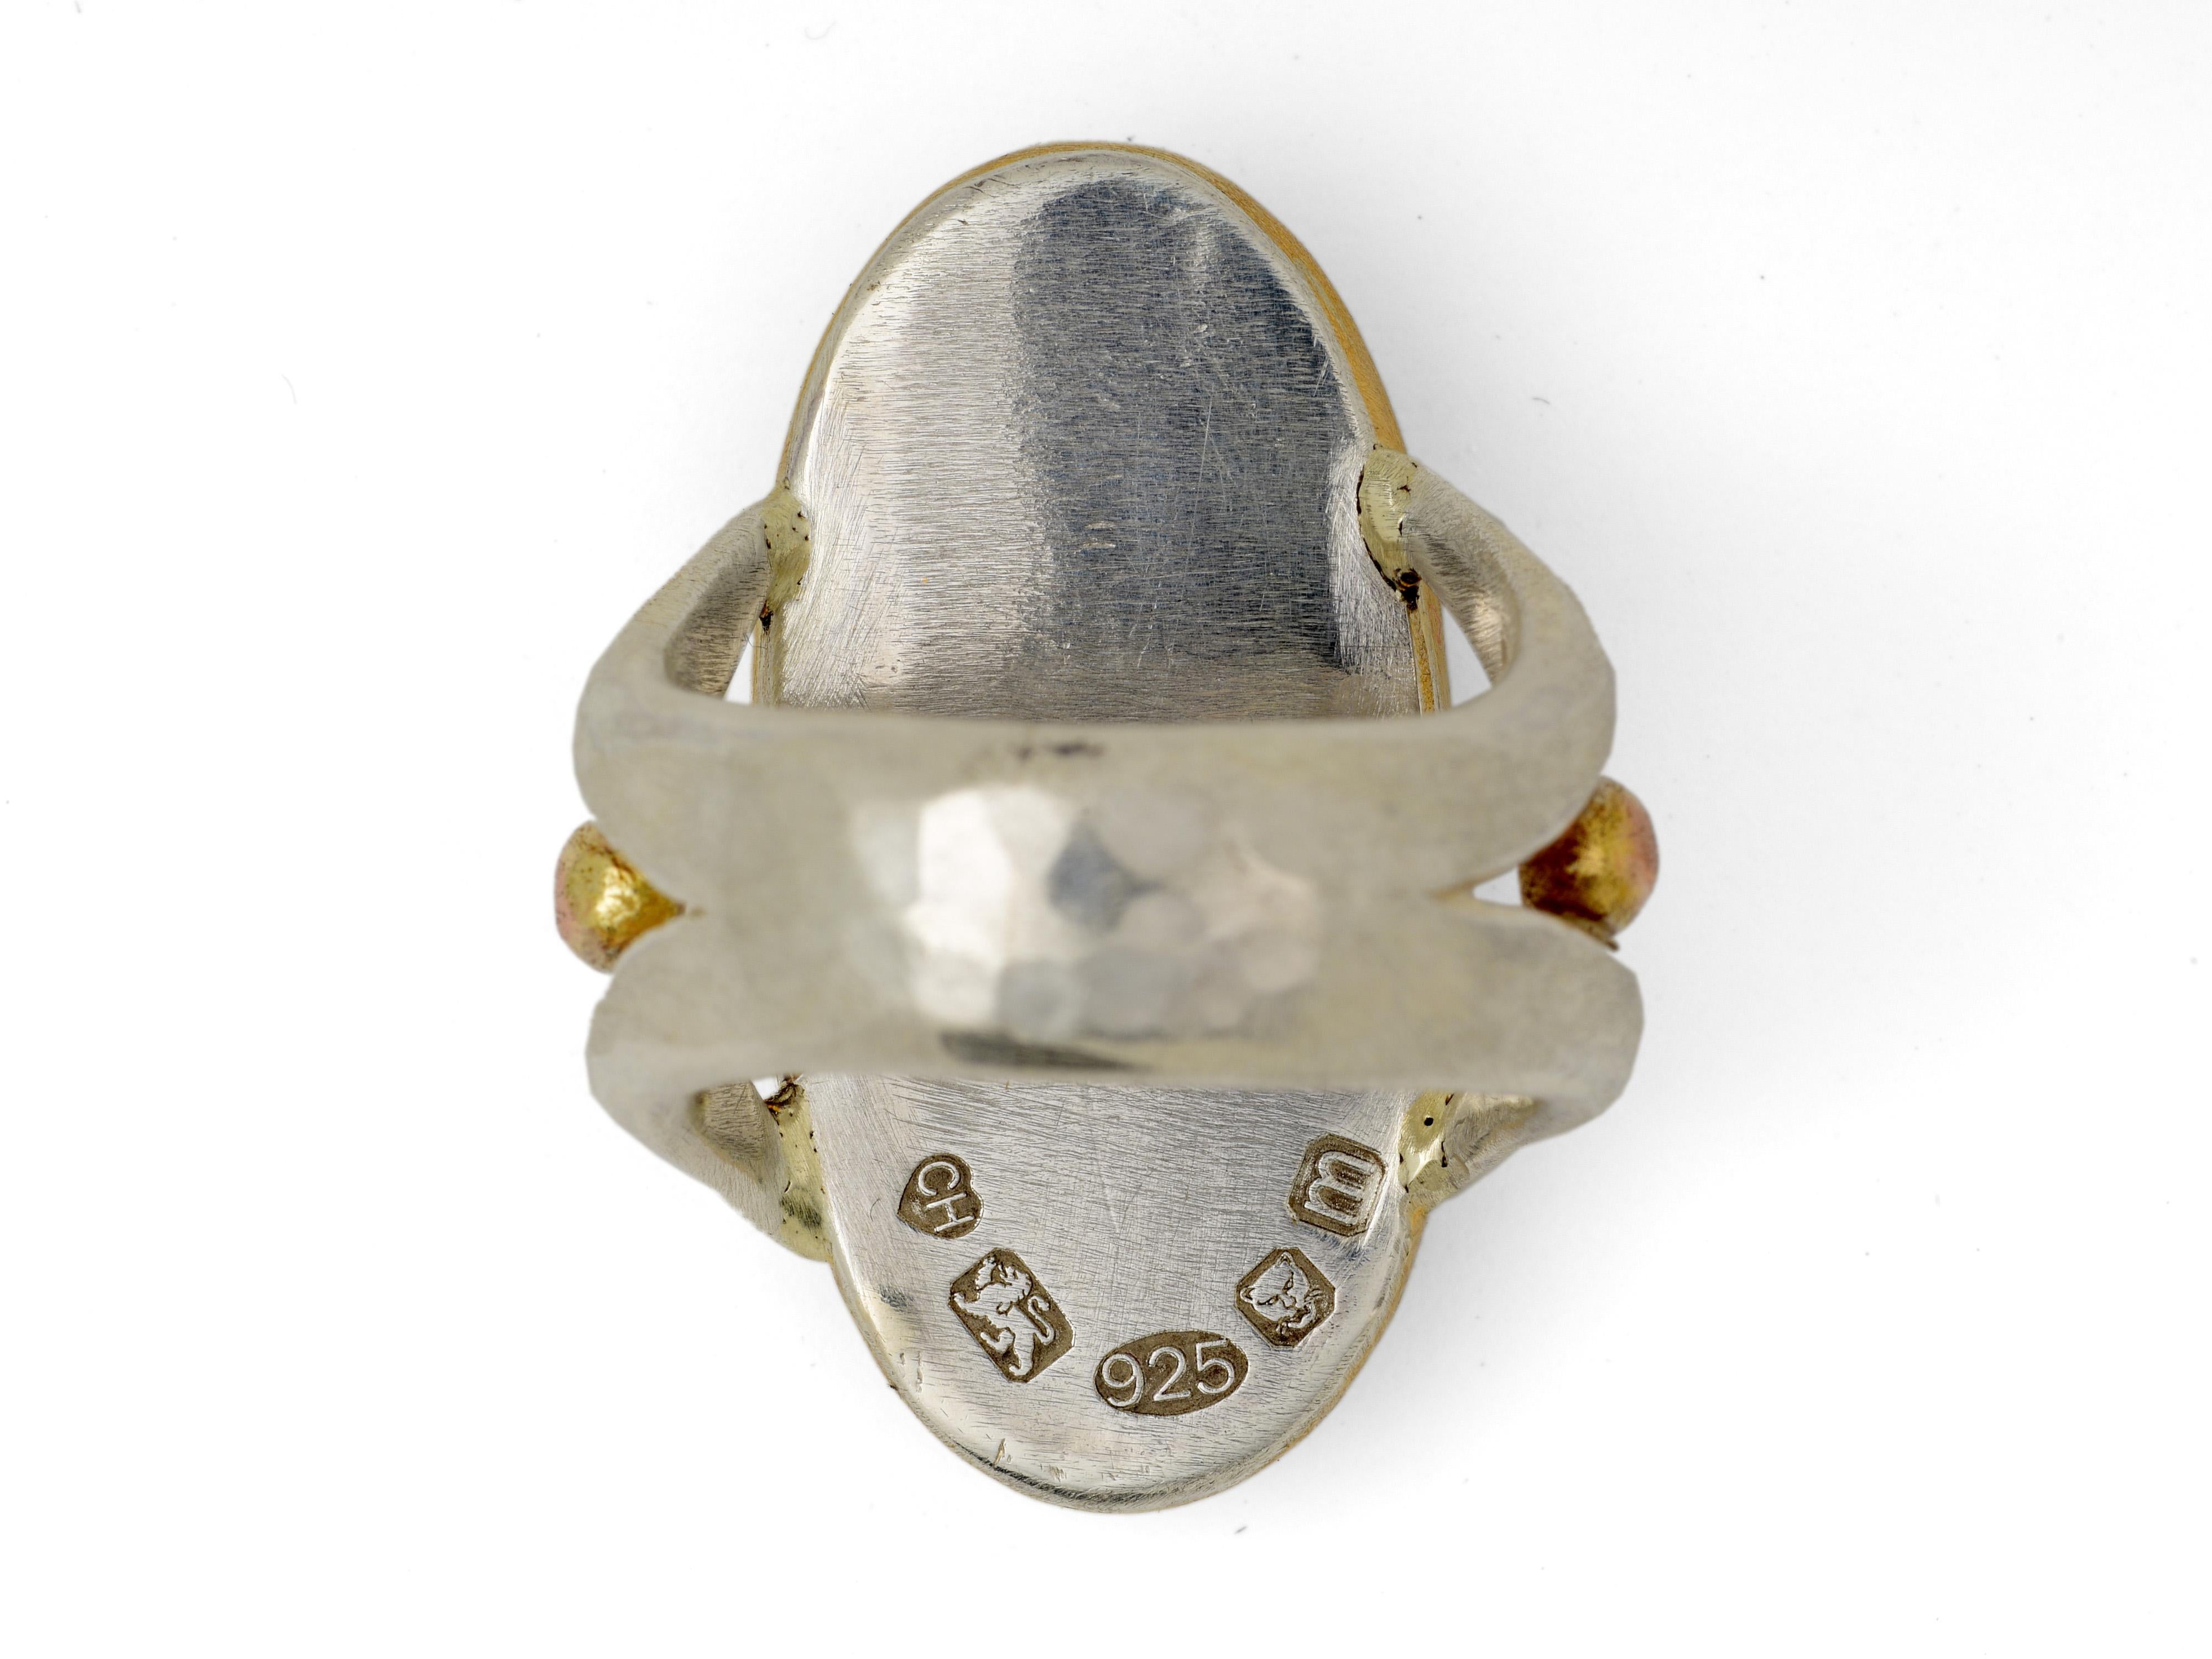 Outstanding Charmian Harris cocktail ring with a large labradorite stone set in 22 karat gold. This mysterious stone is gifted with electric blue flashes. The main shape of the ring is handmade out of sterling silver with grains of rose gold.

U.K